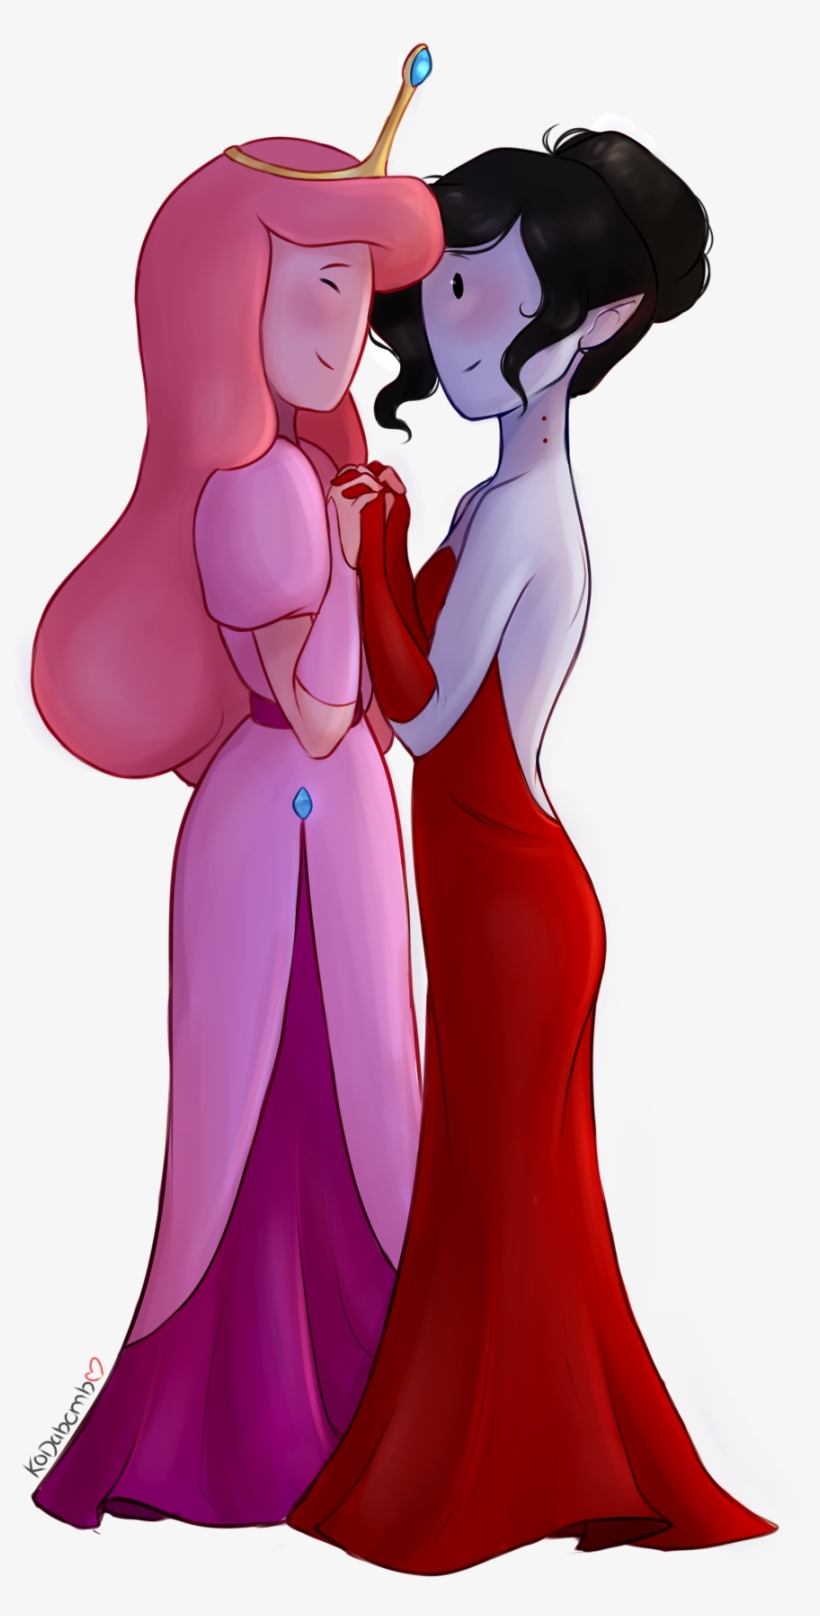 They'd Be Going To Formal Together As Friends Adventure - Princess Bubblegum, transparent png #6173016